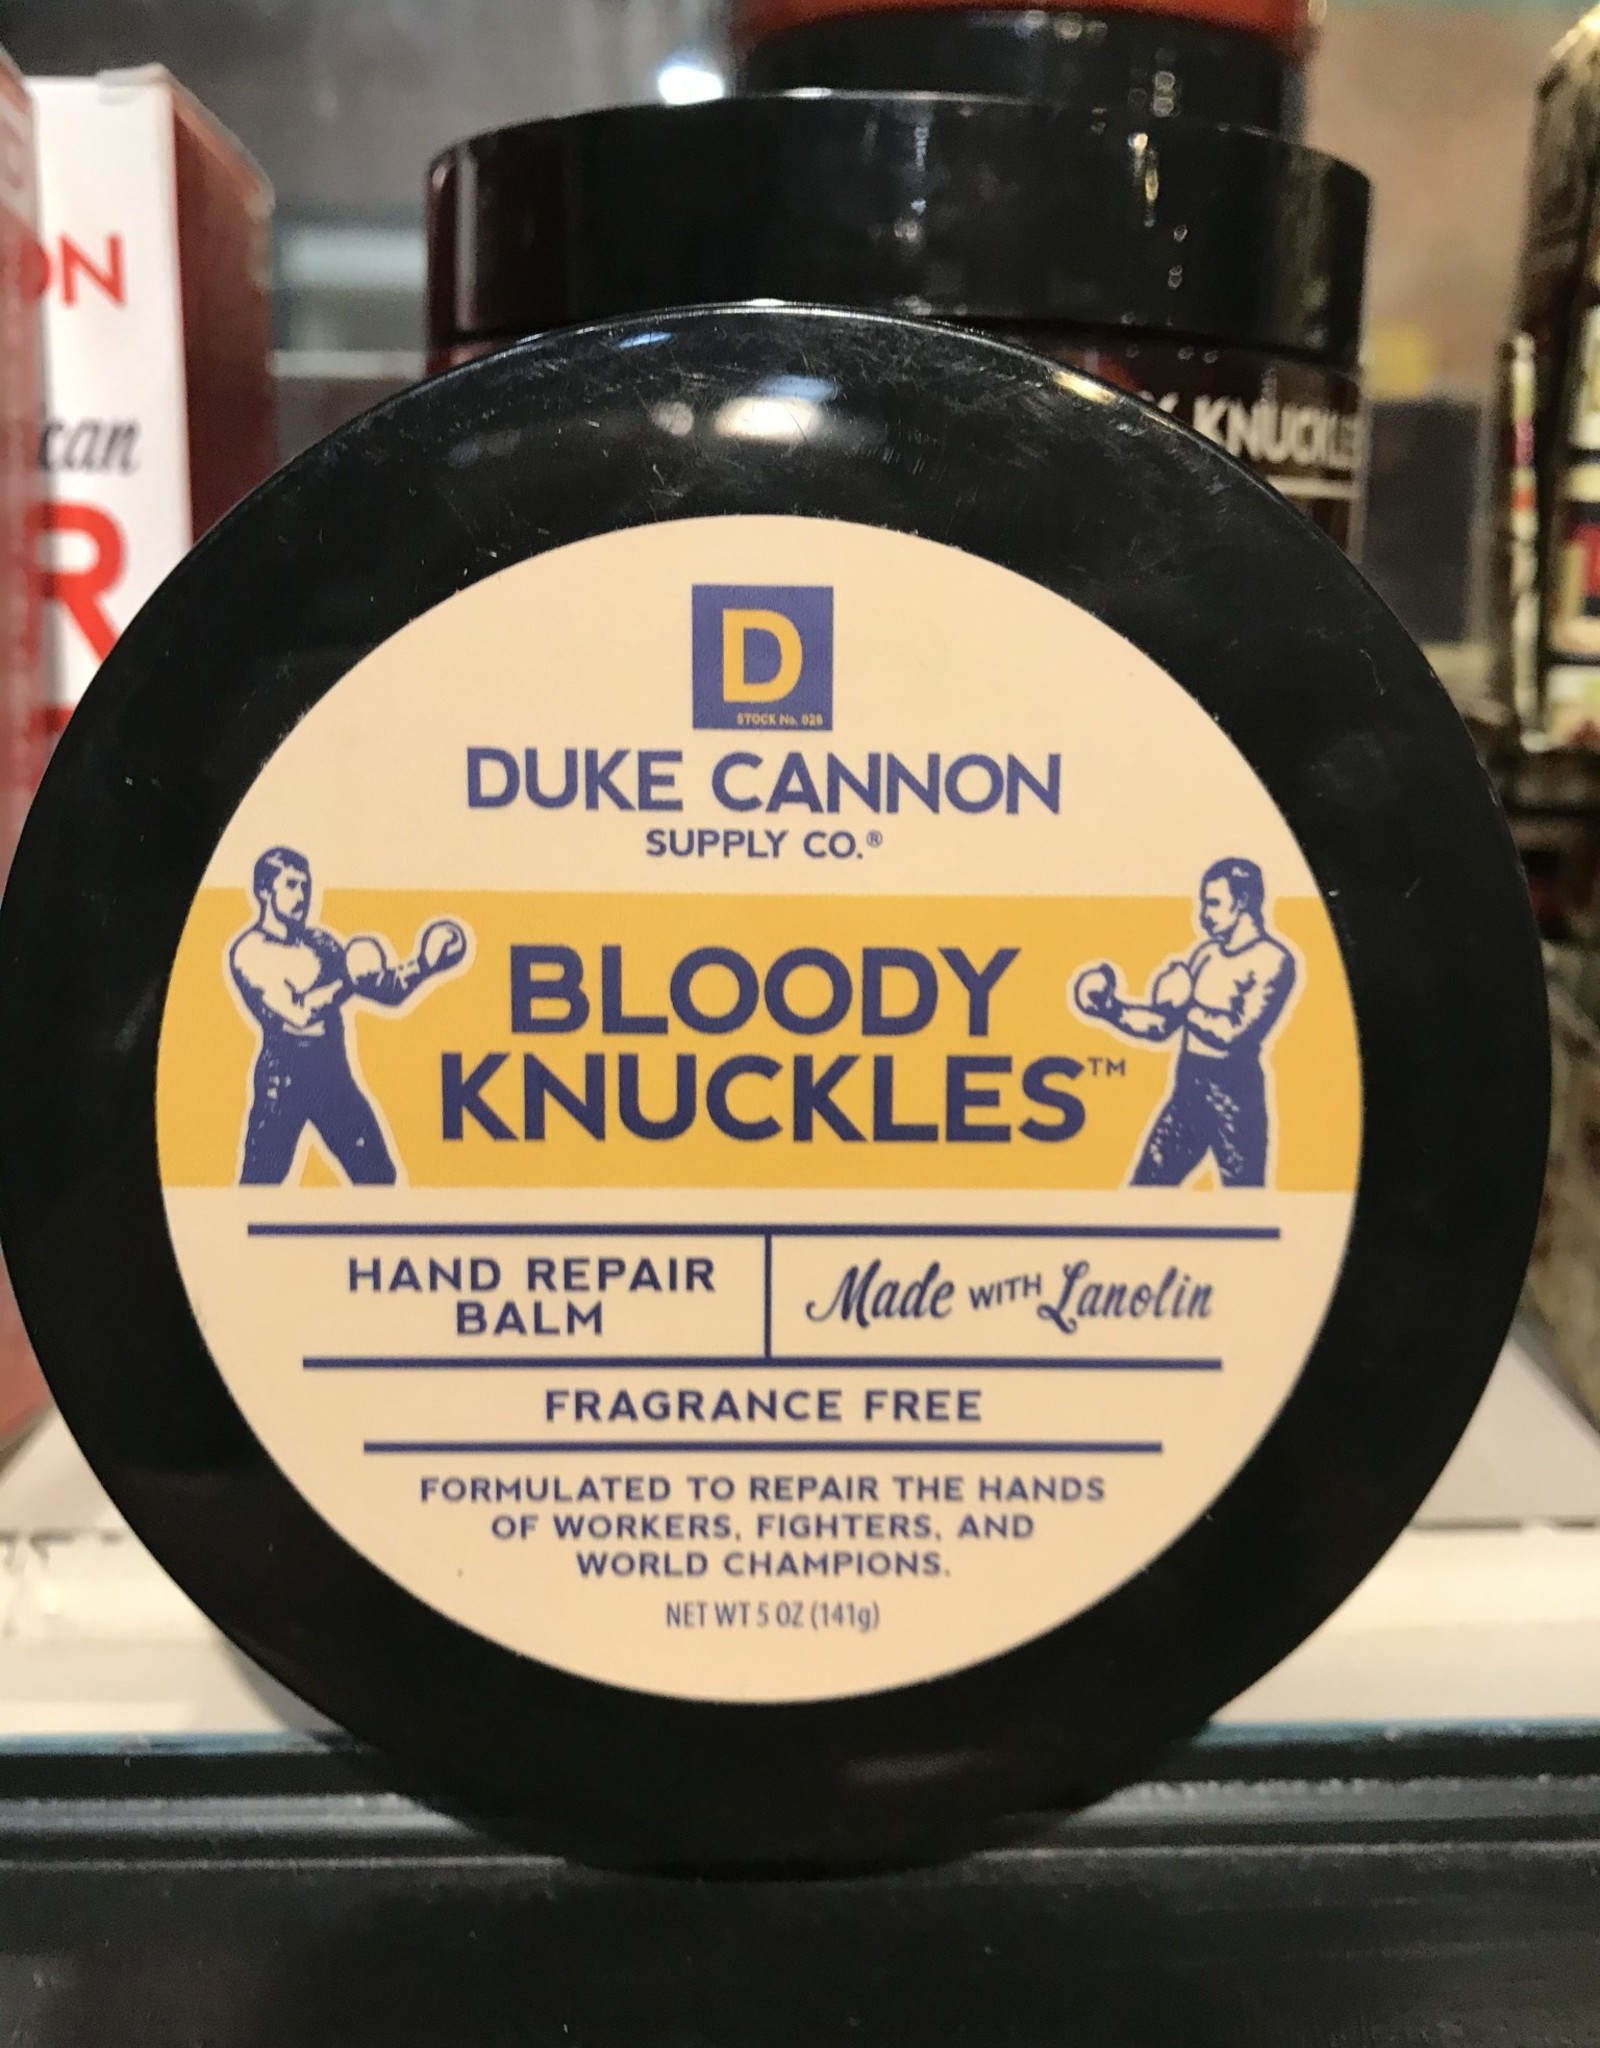 Personal Care Duke Cannon - Hand Repair Balm Bloody Knuckles